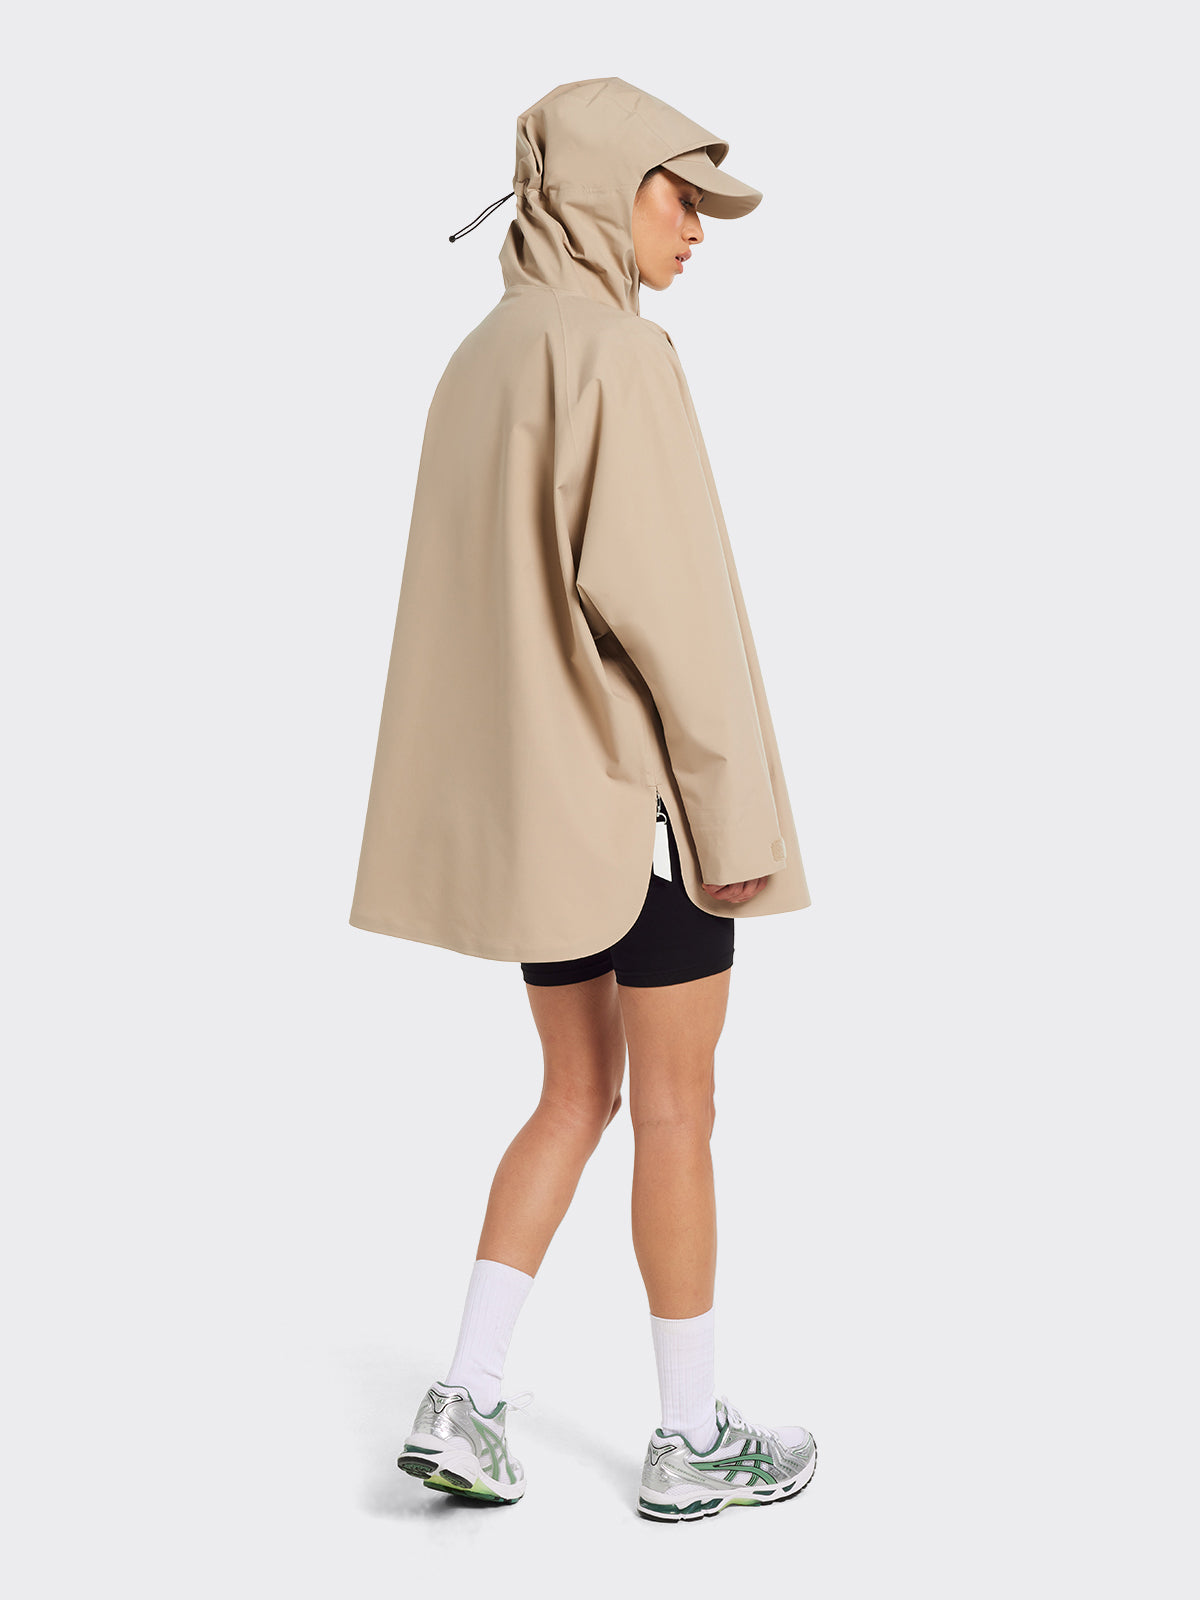 Woman dressed in Voss poncho by Blæst in Beige